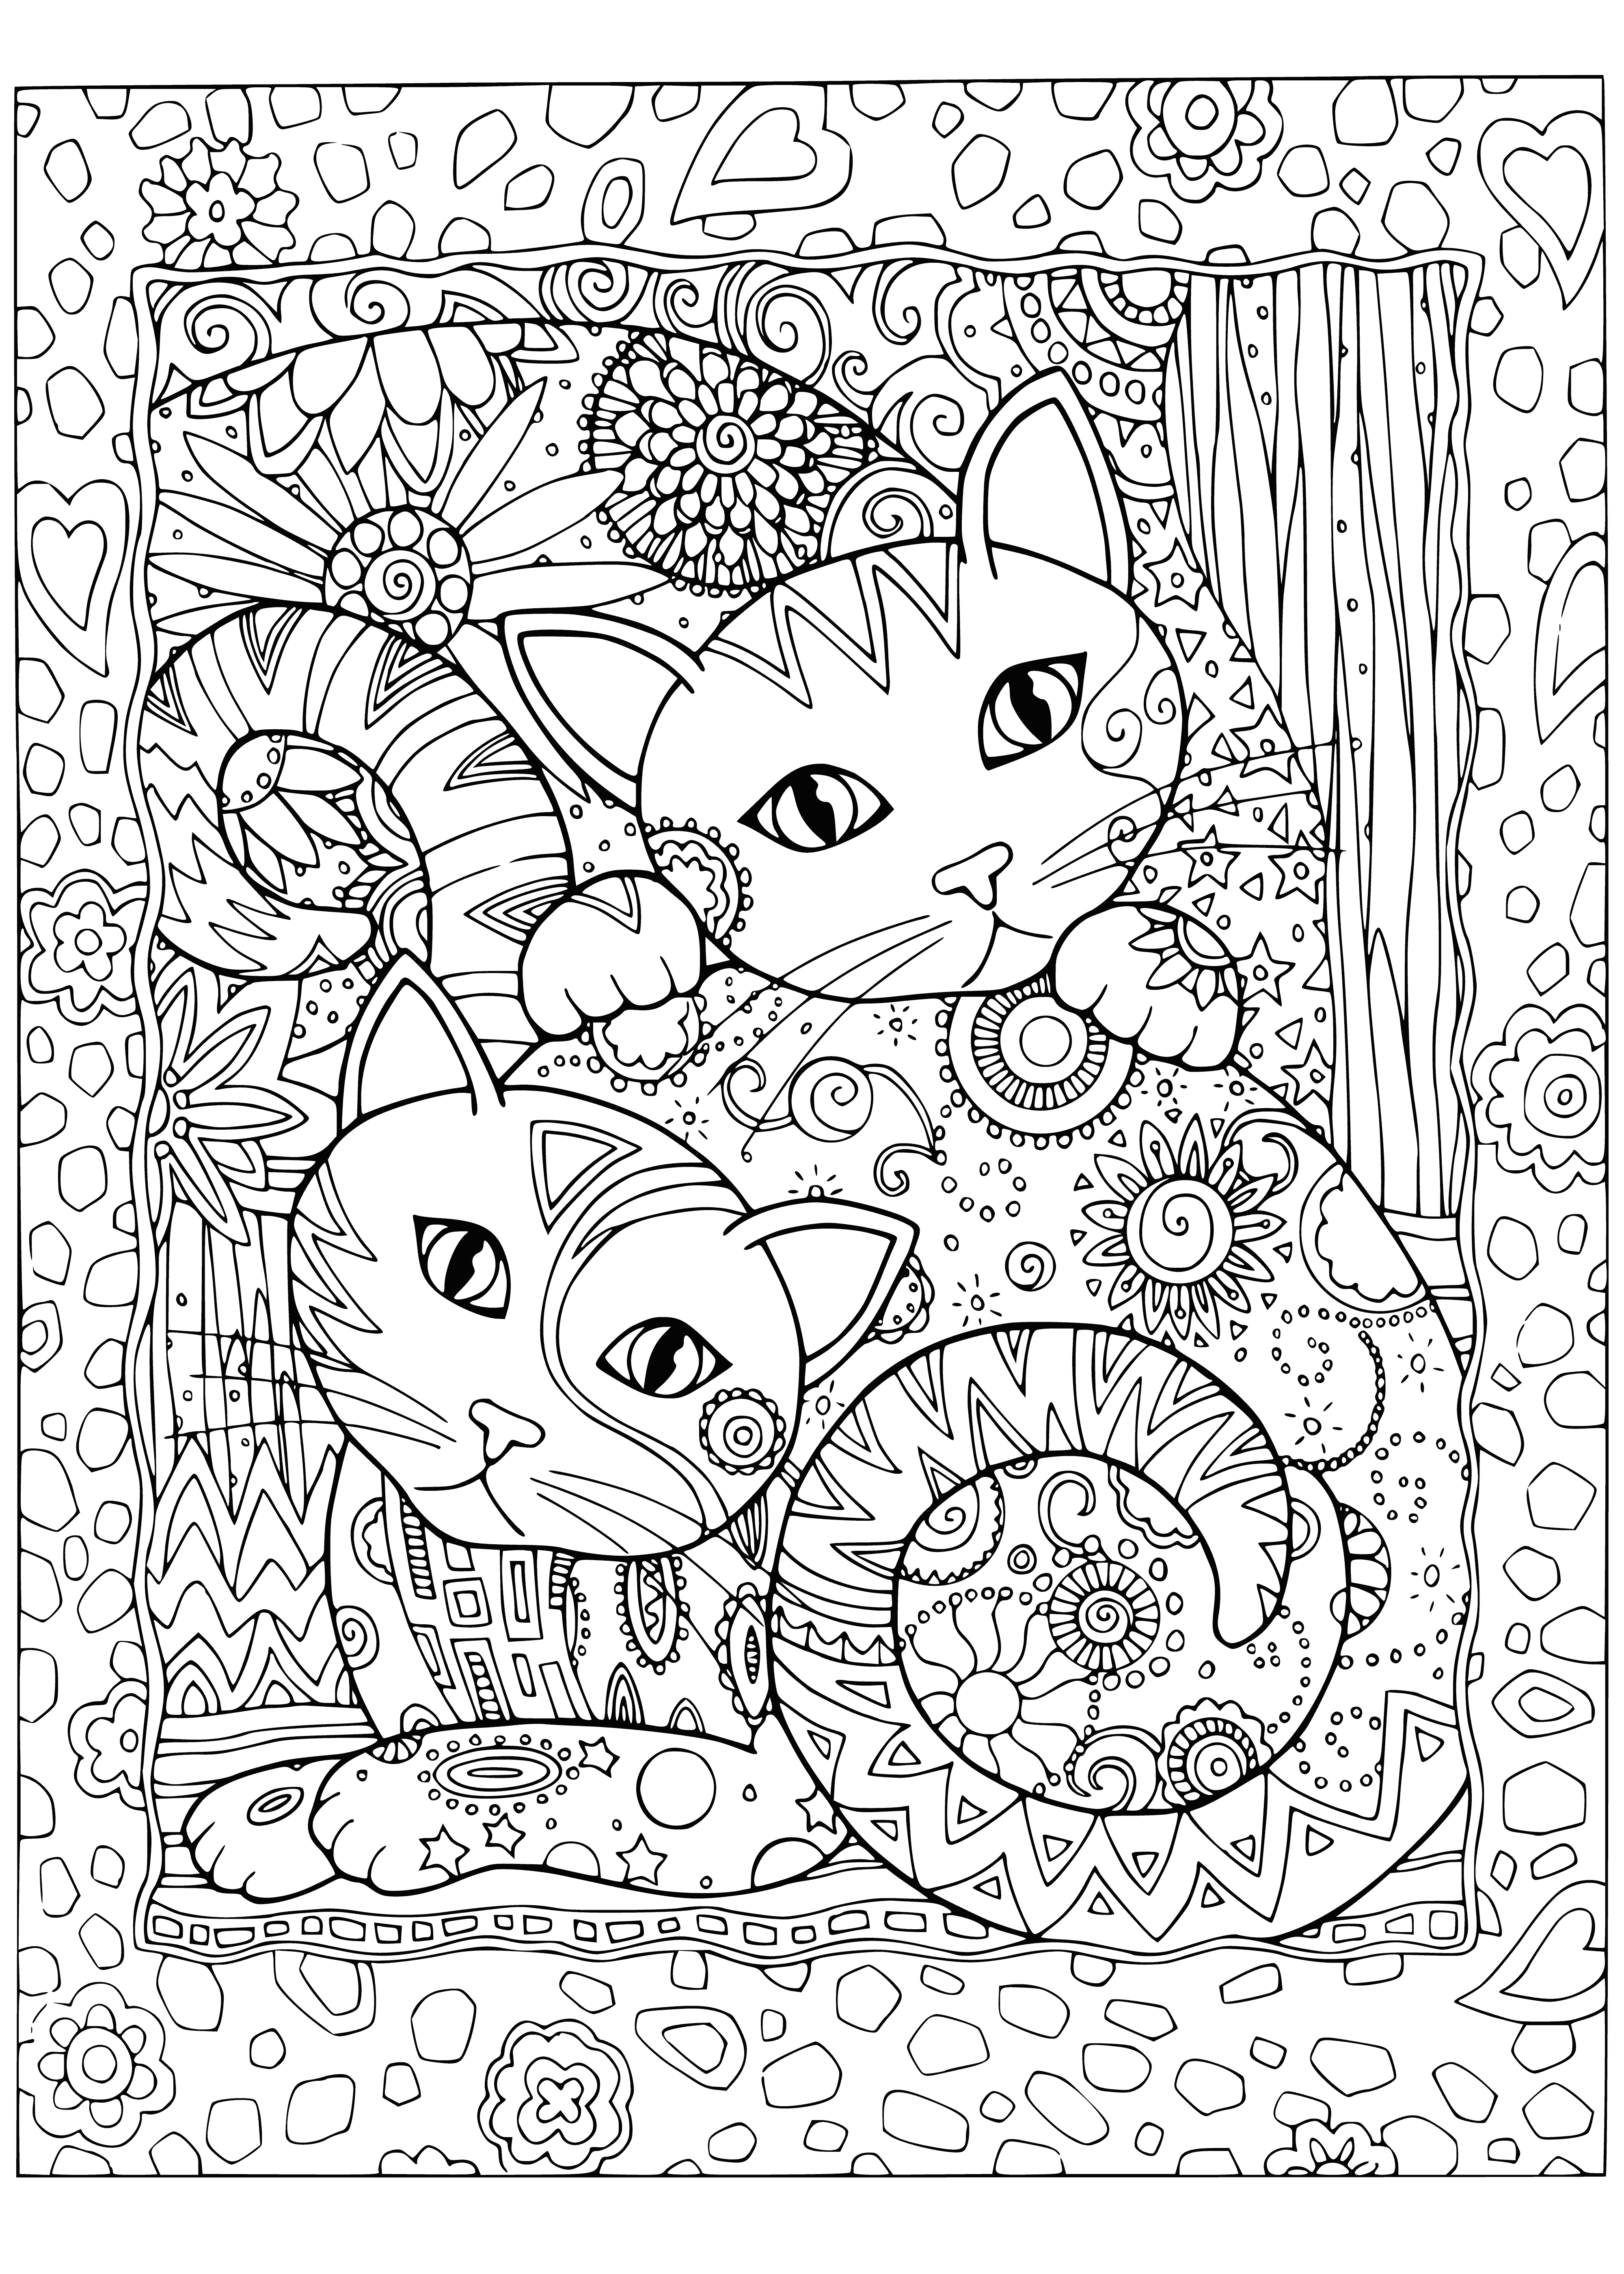 coloring page: Two cats, one posing, one watching - a perfect coloring page. #Cats